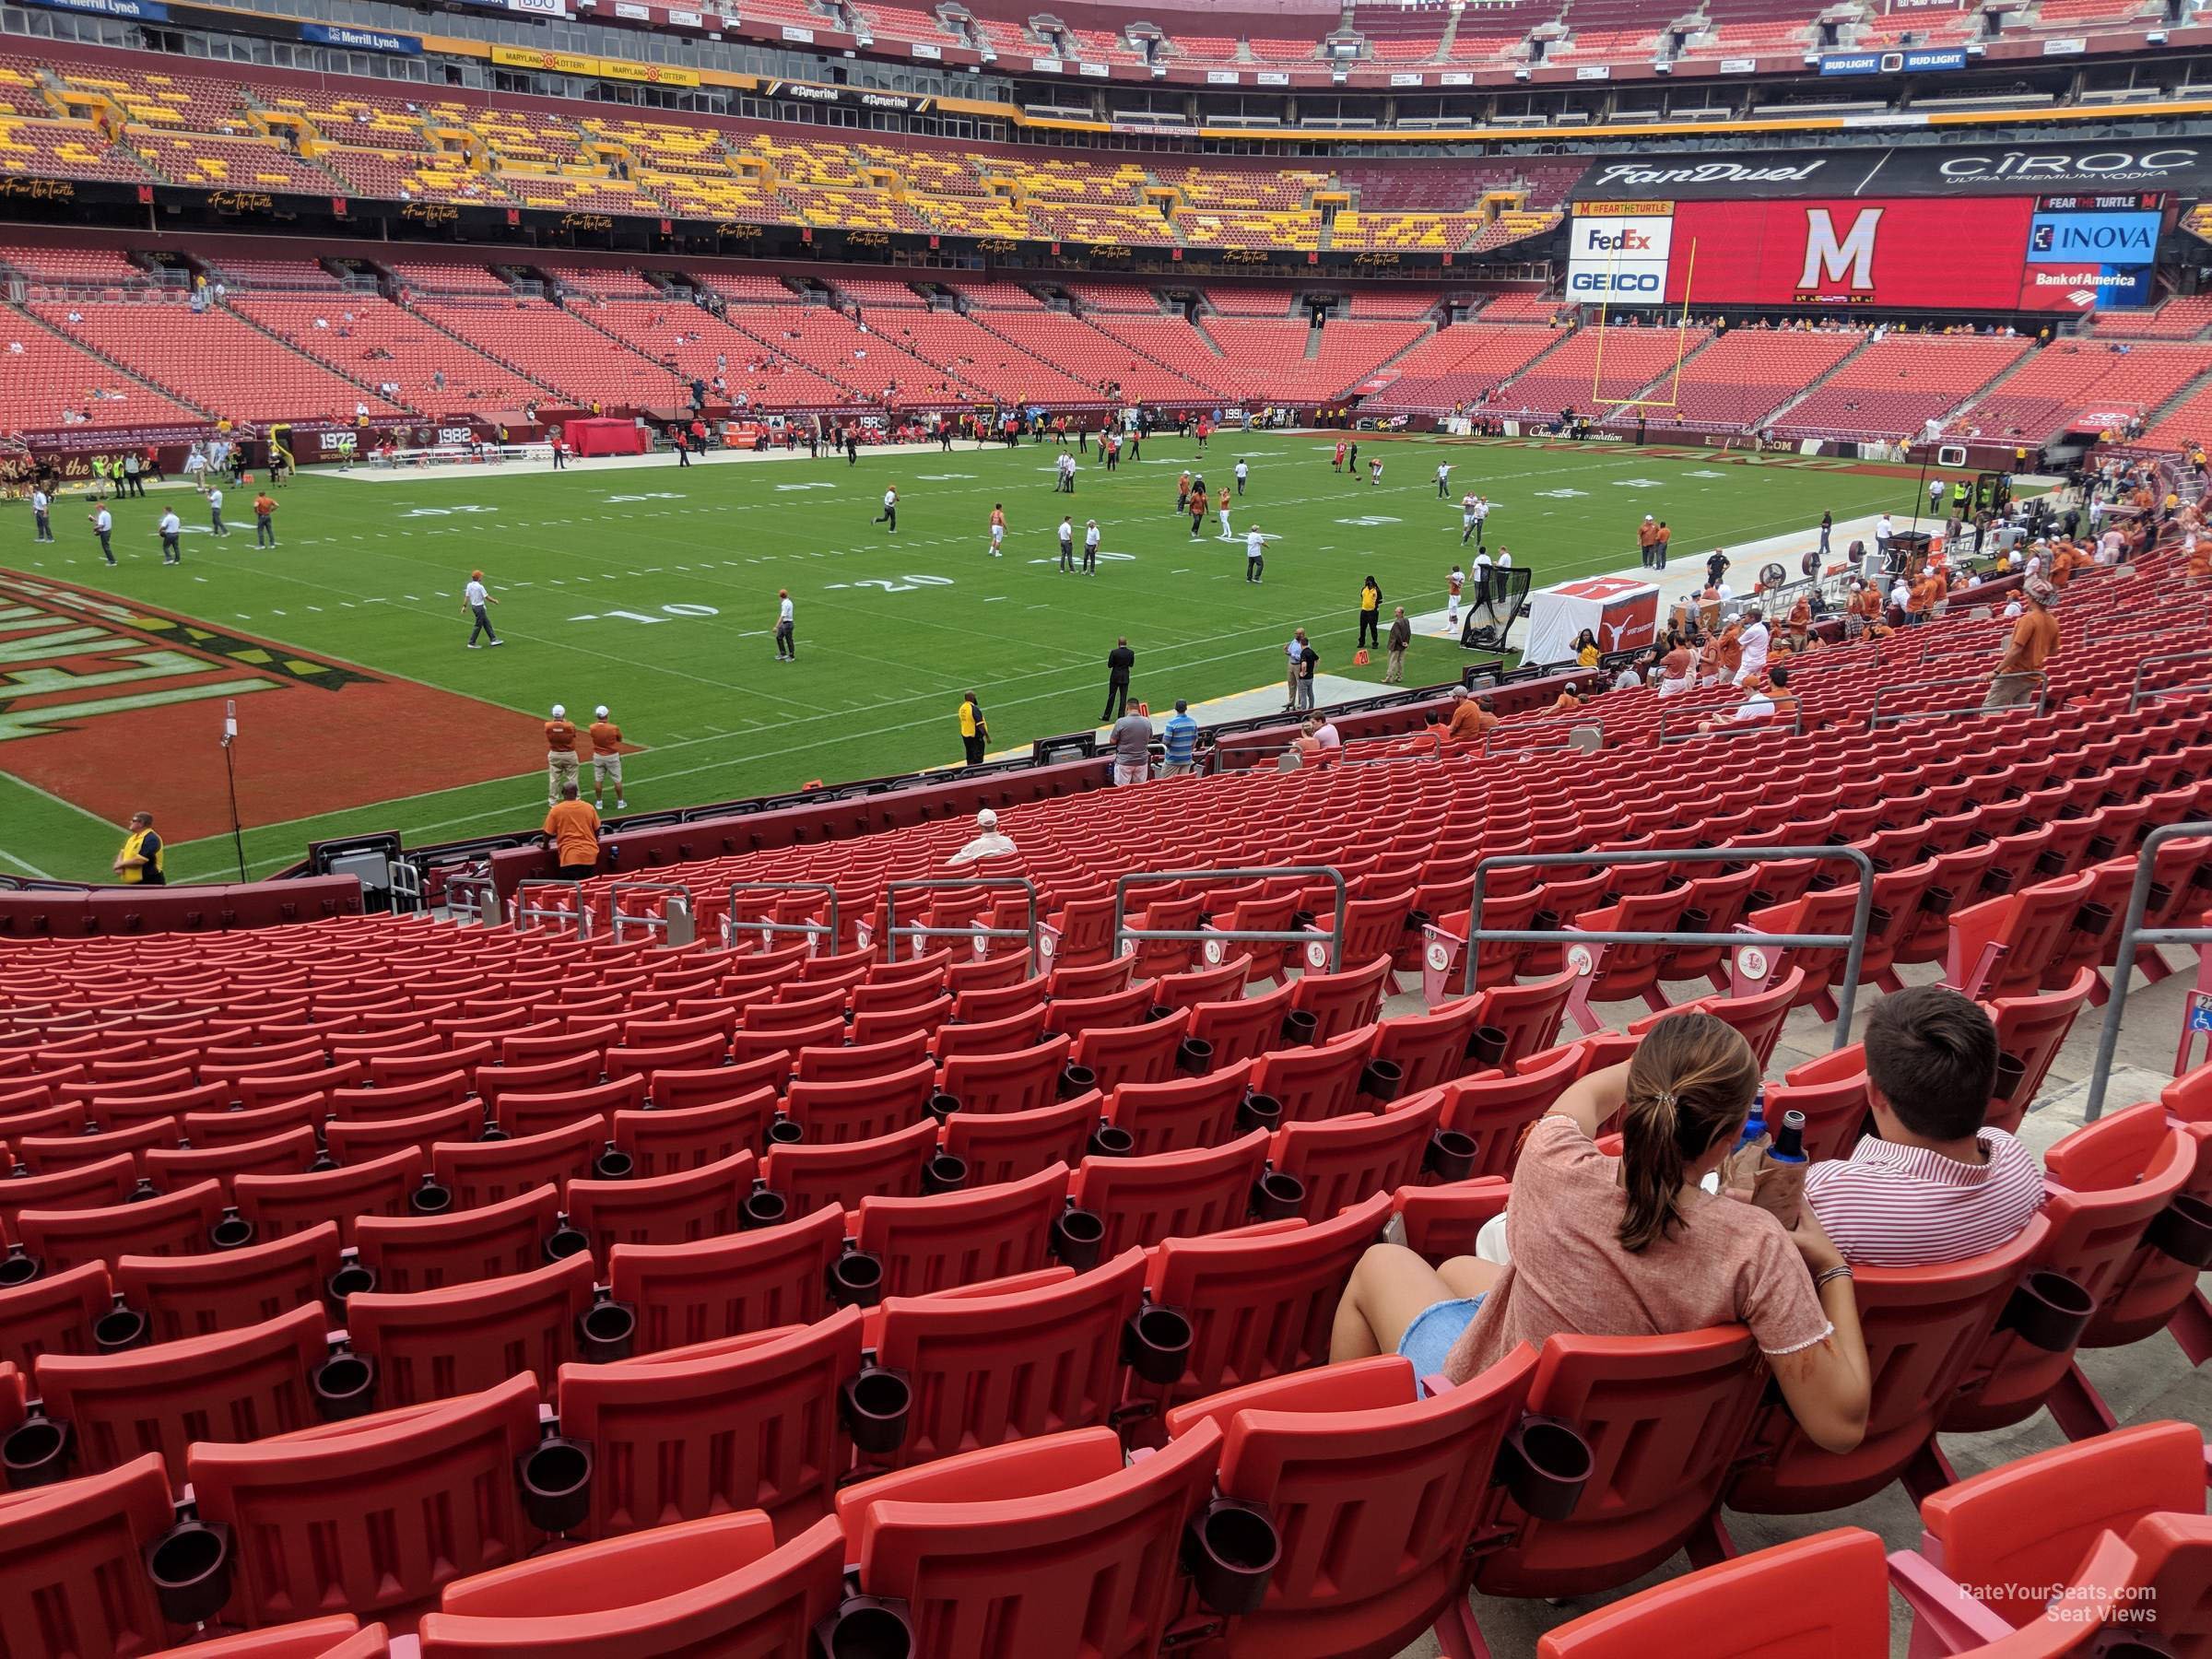 section 127, row 25 seat view  - fedexfield